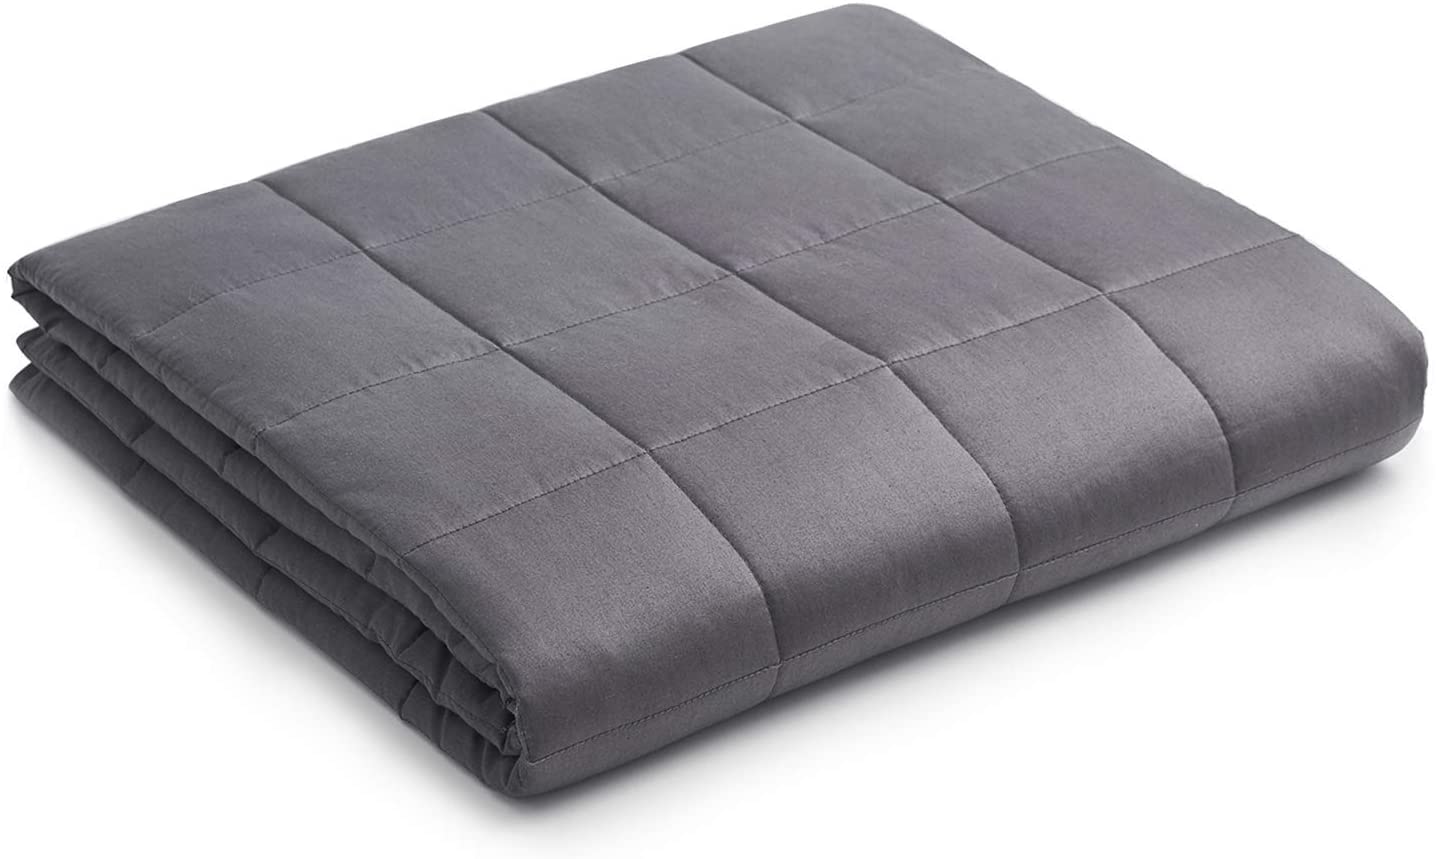 Consider using a weighted blanket to reduce anxiety and improve sleep.